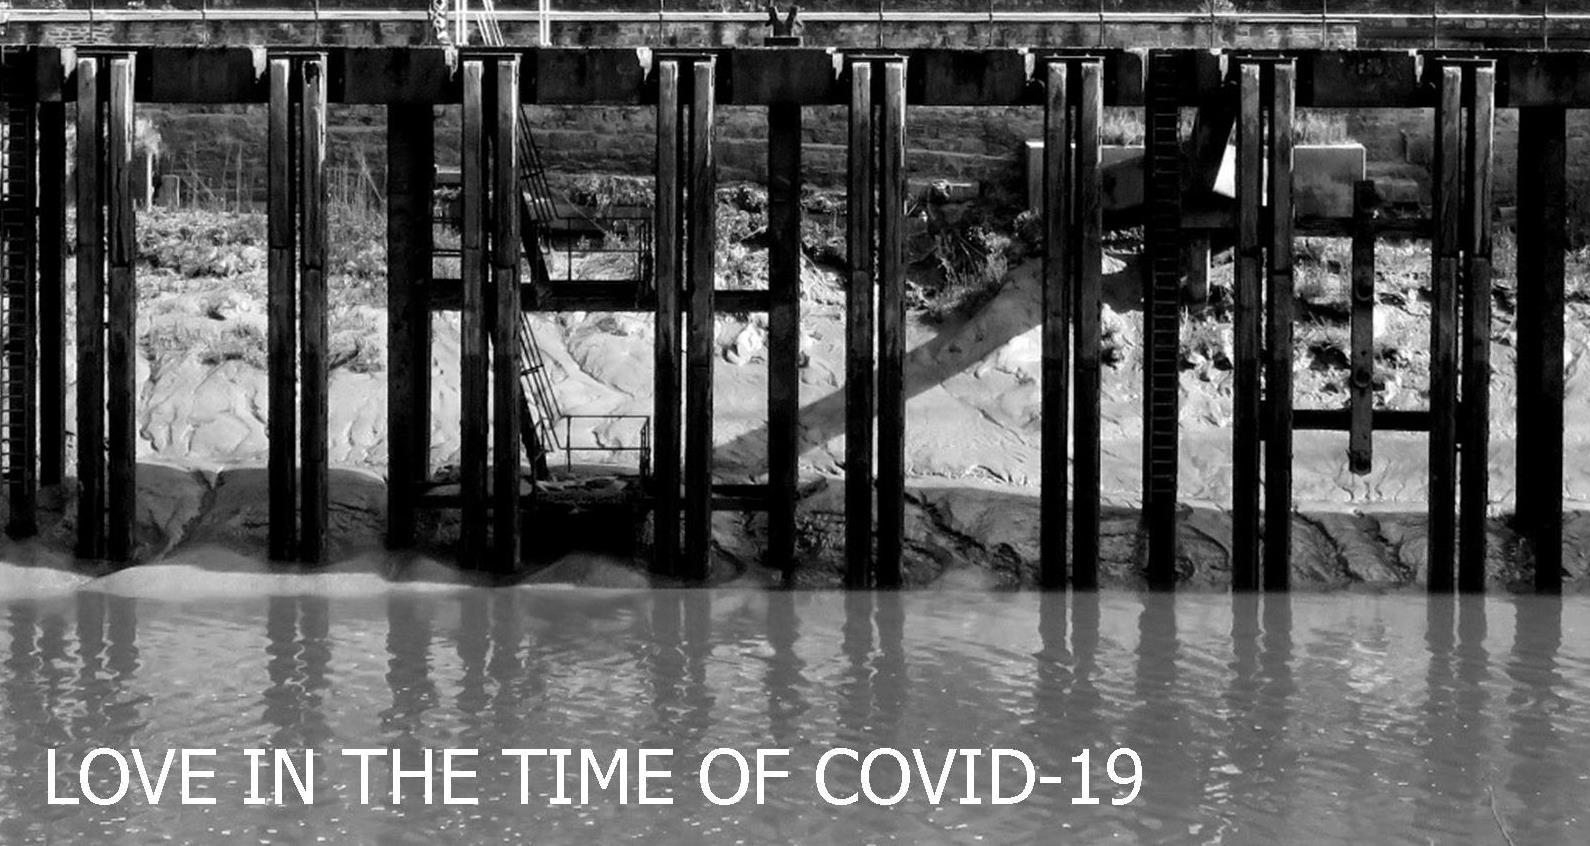 LOVE IN THE TIME OF COVID-19